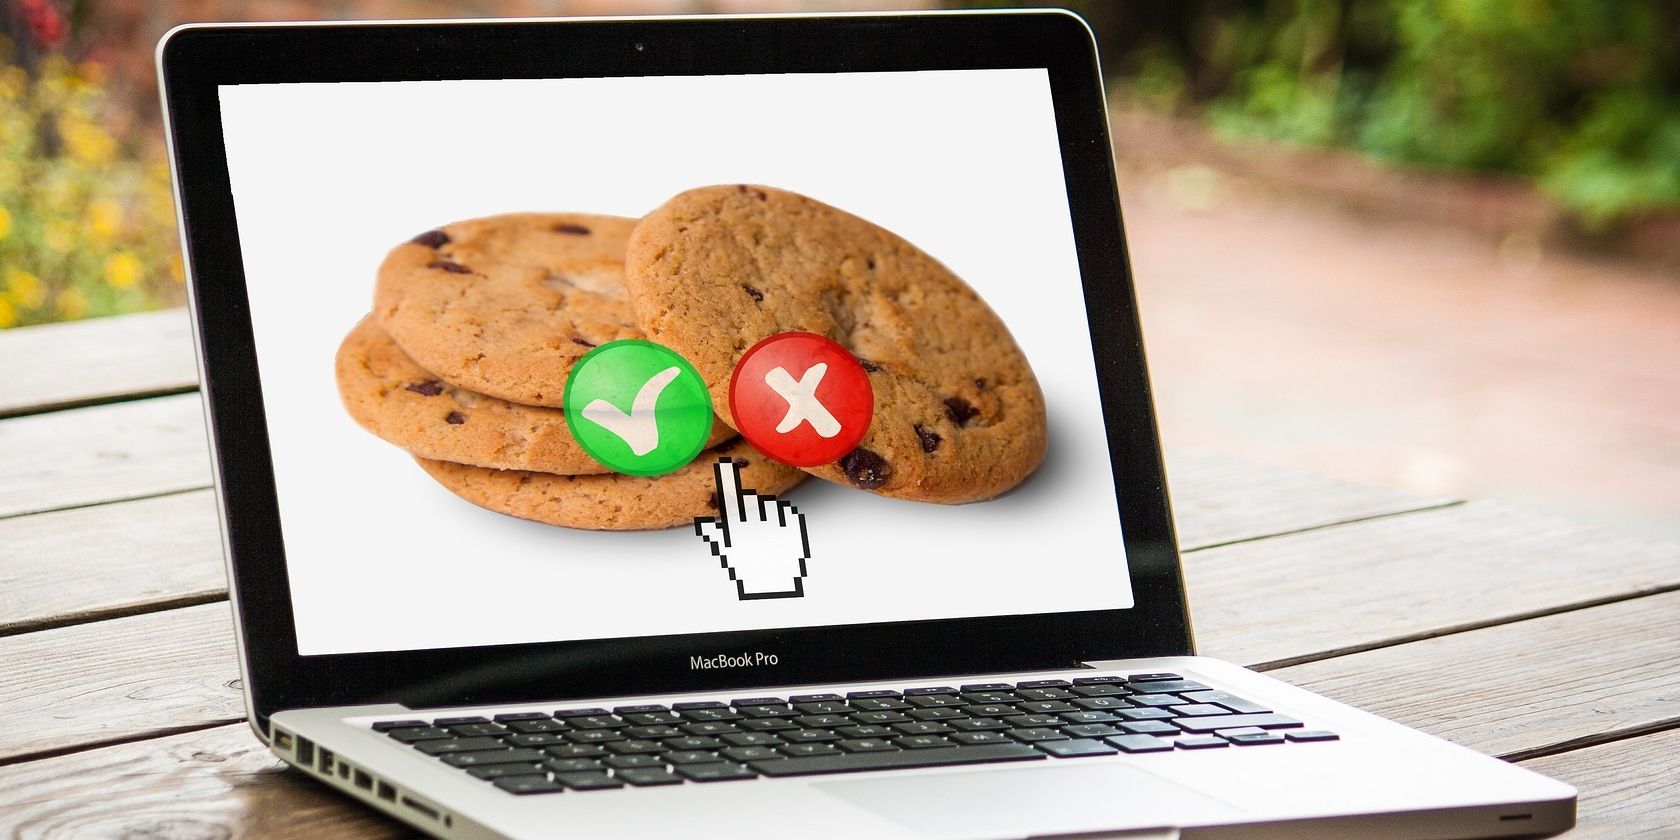 Macbook with cookies and tick and cross options on screen.